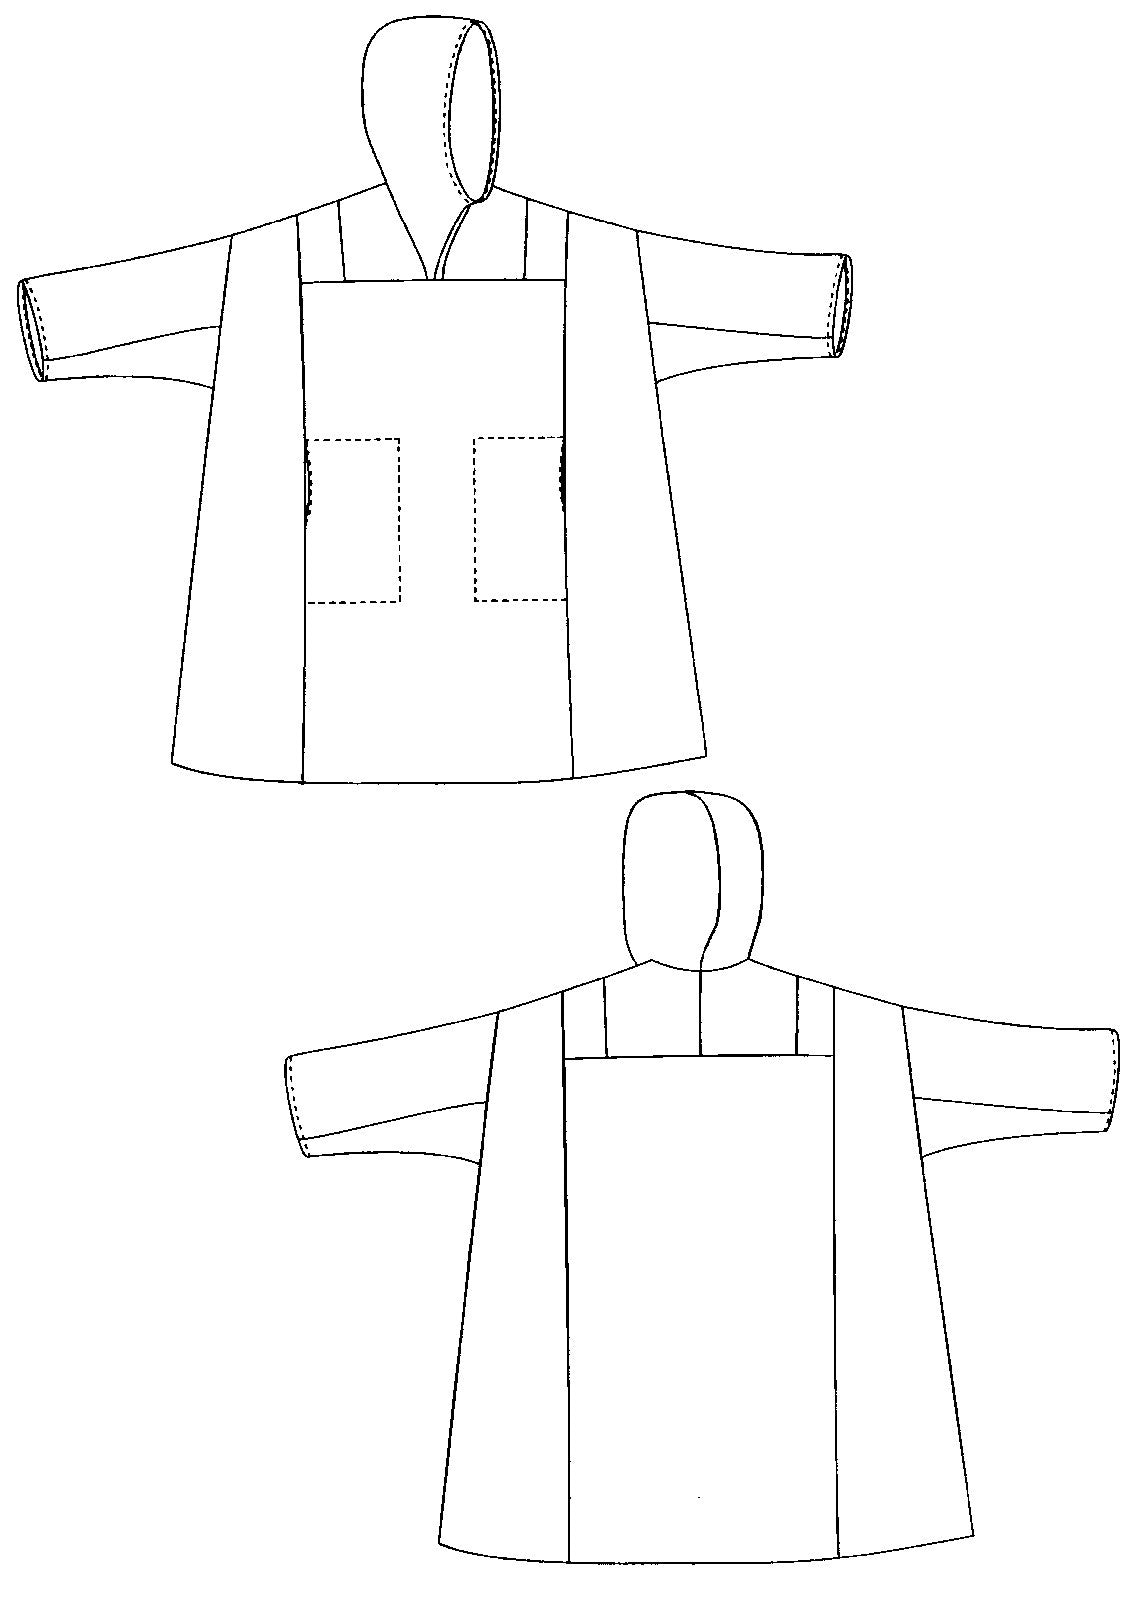 FLat line drawings of front and back views of Siberian Parka